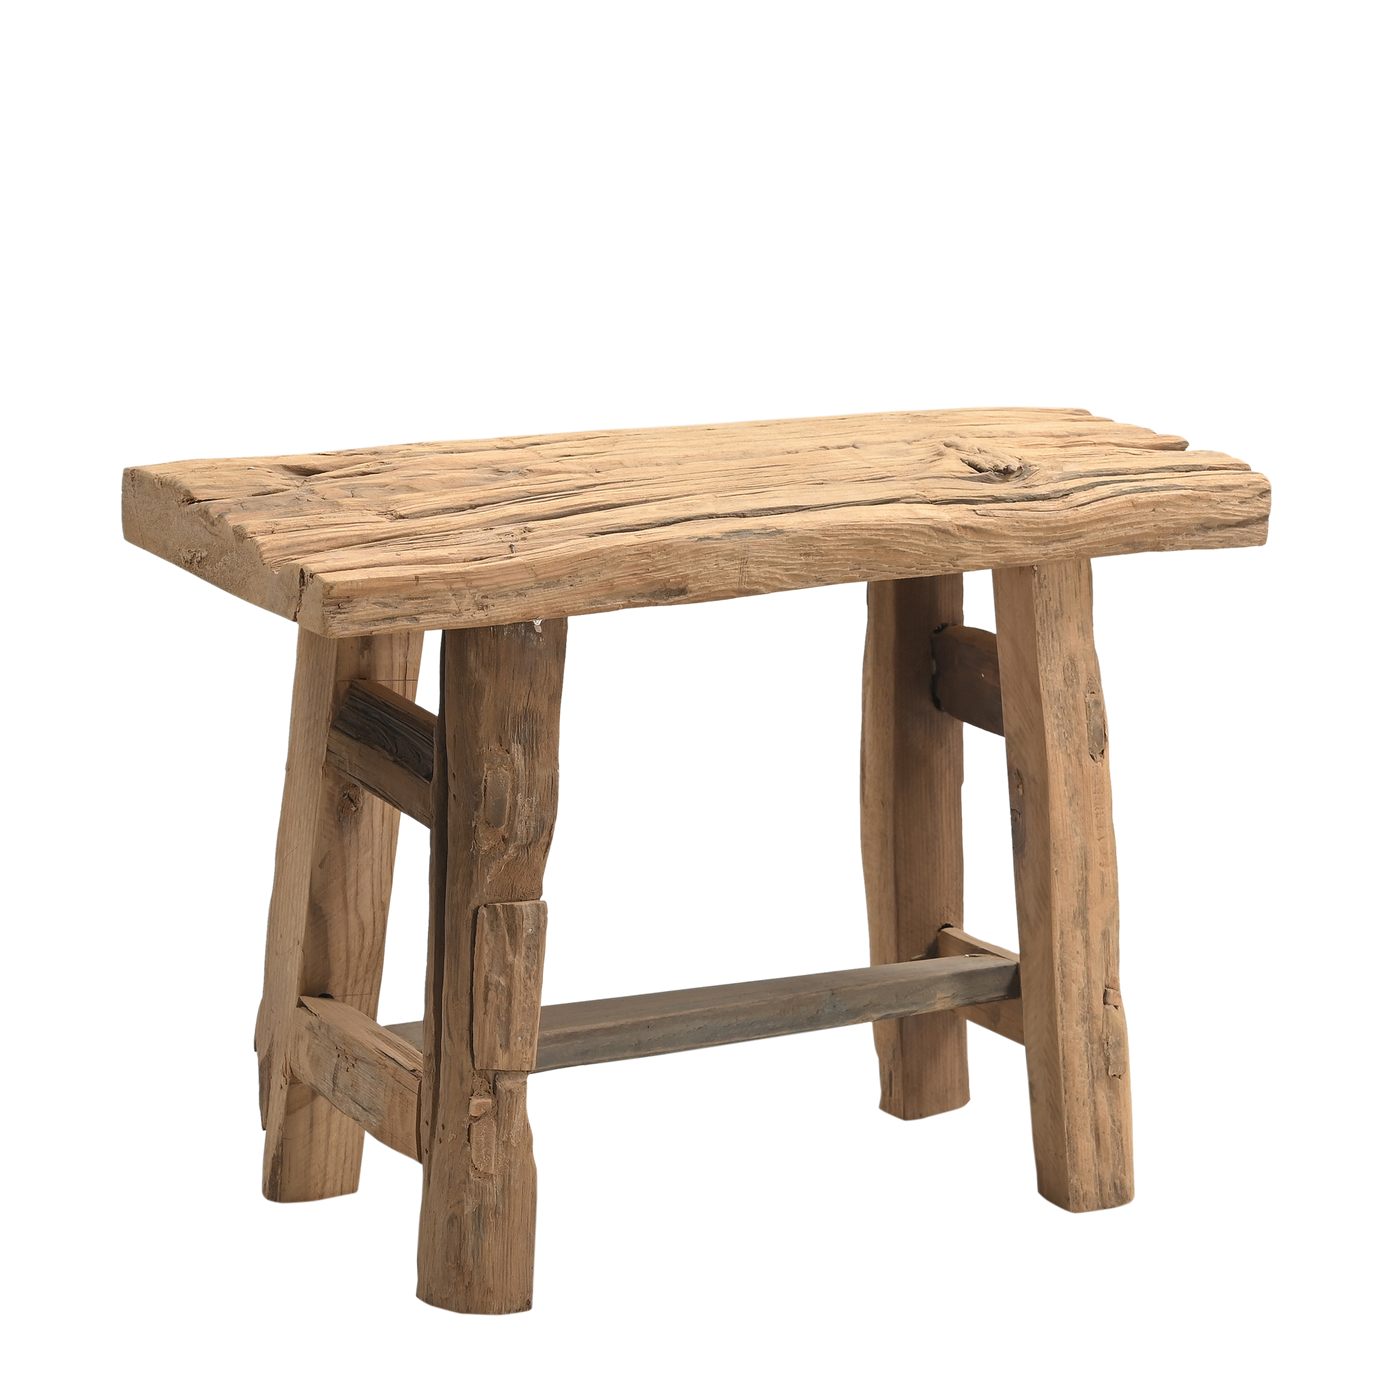 Chauki - Old wooden stool n°6